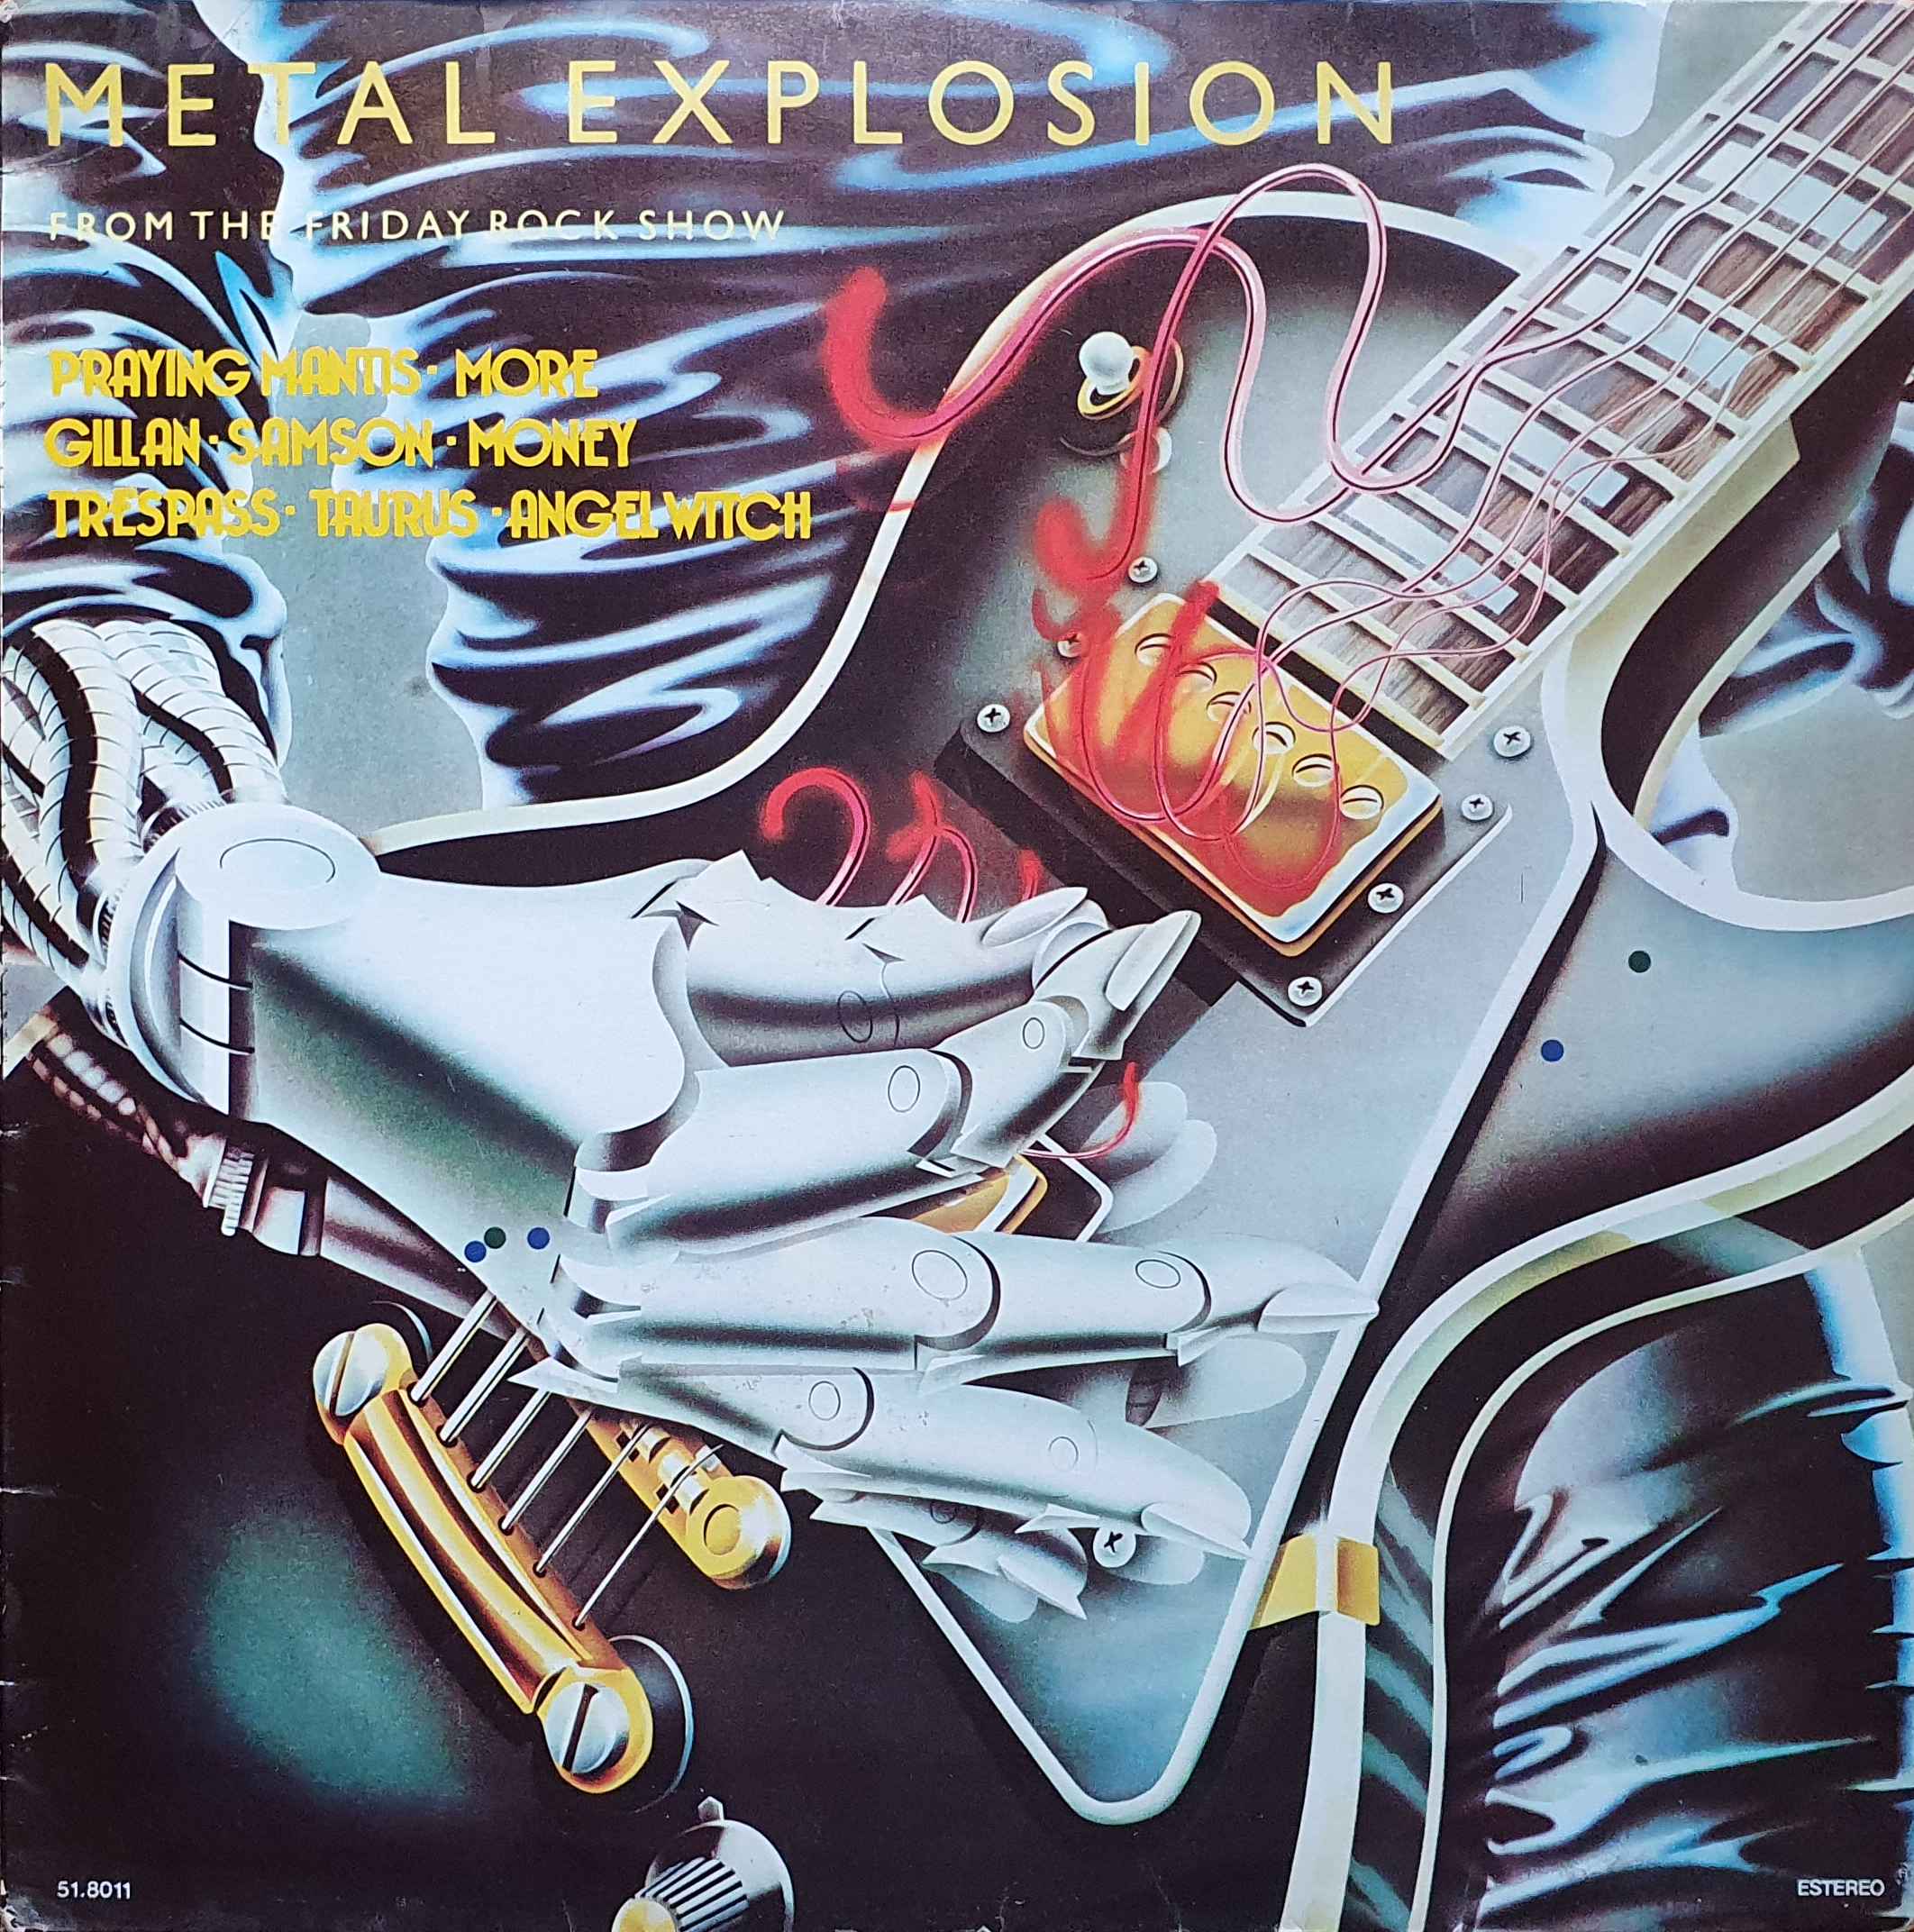 Picture of 51.8011 Metal explosion from The Friday Rock Show by artist Various from the BBC albums - Records and Tapes library